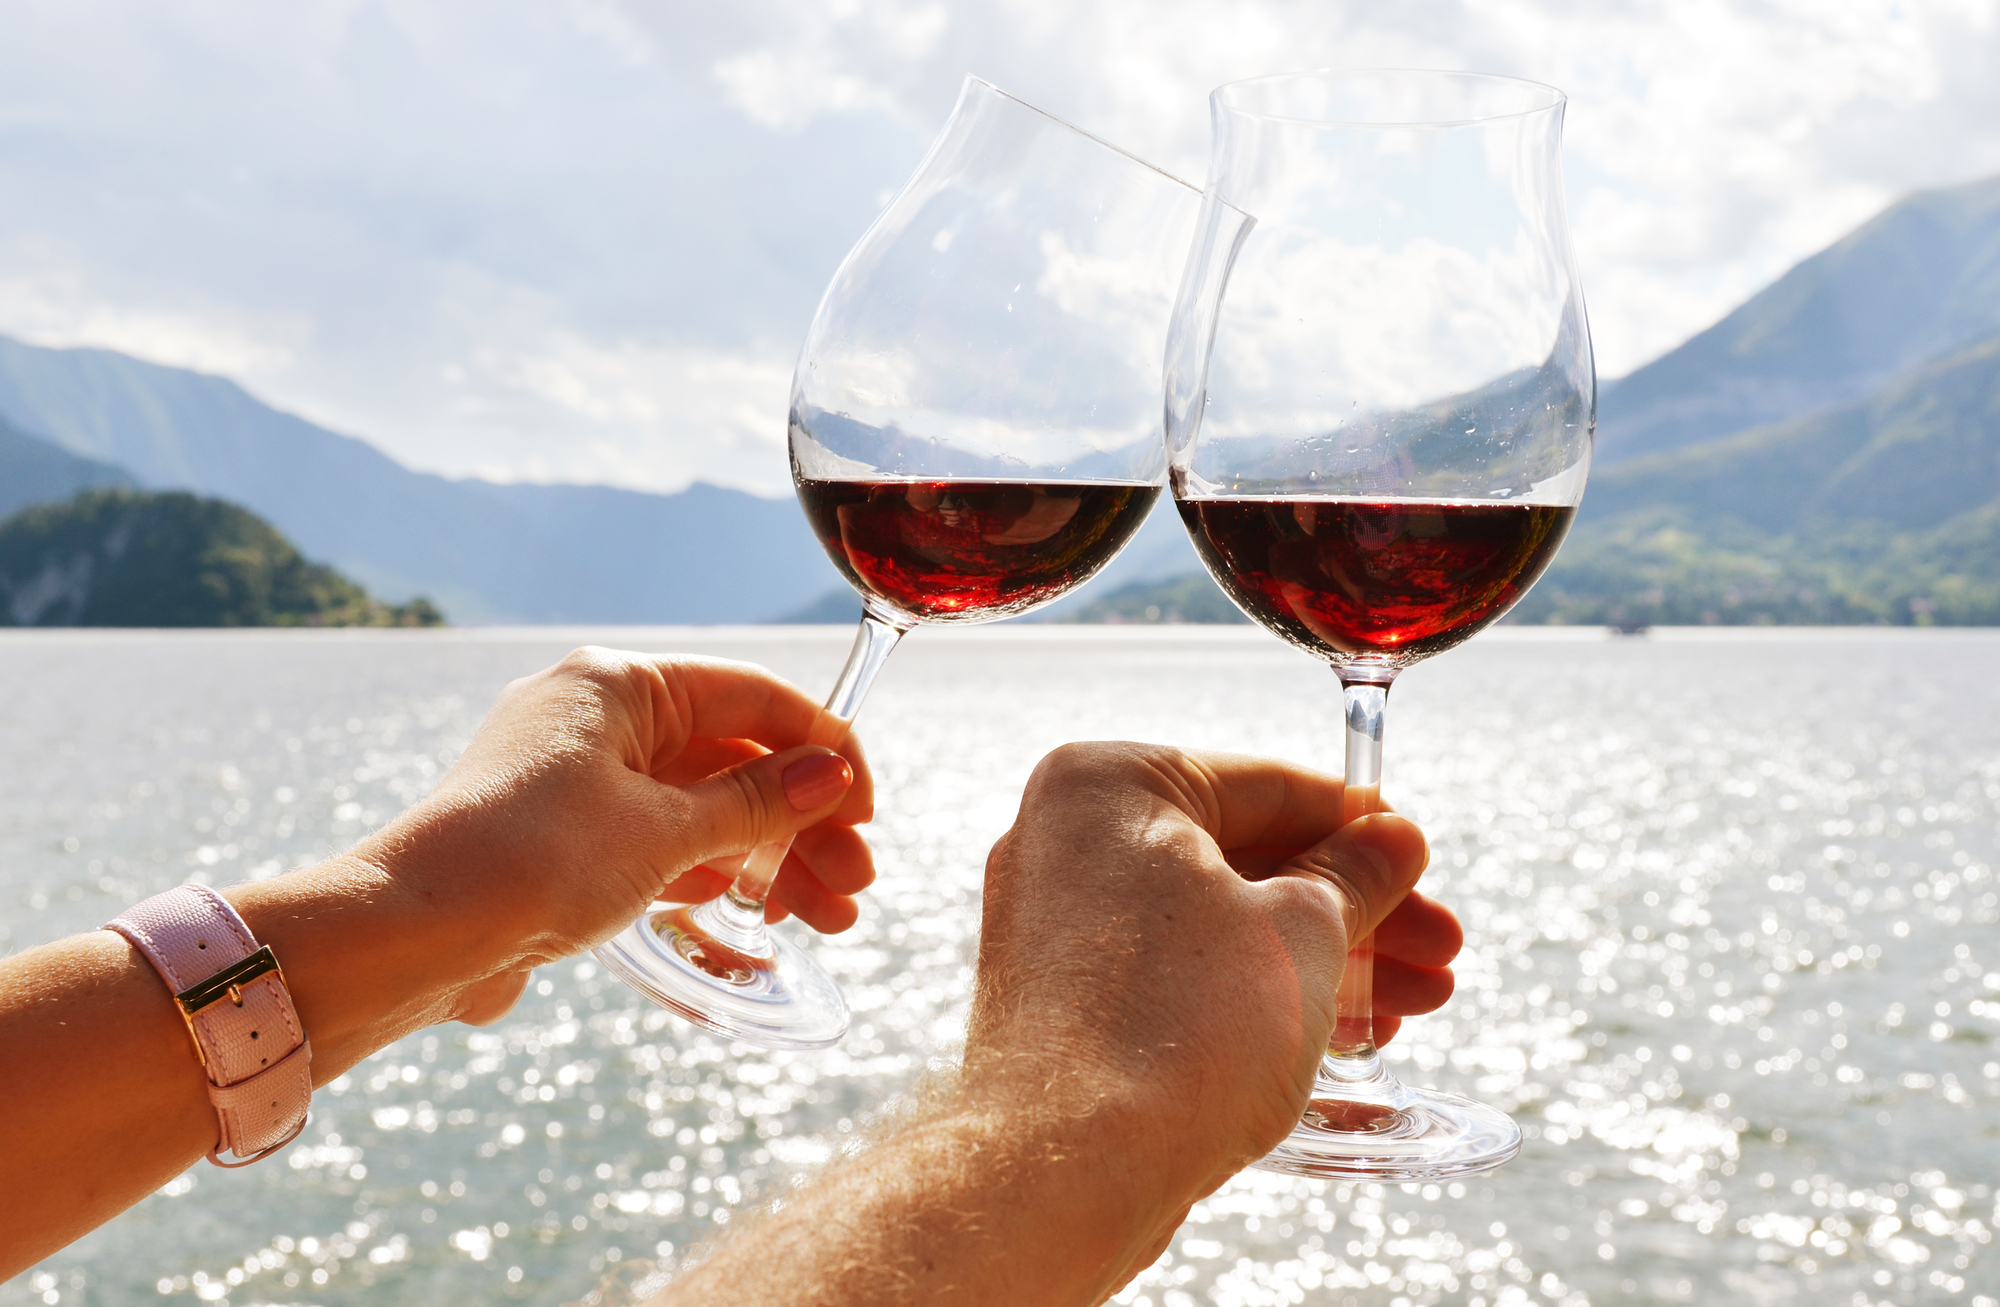 Wineglasses in the hands against lake Como, Italy / Image: happyalex, Deposit Photos